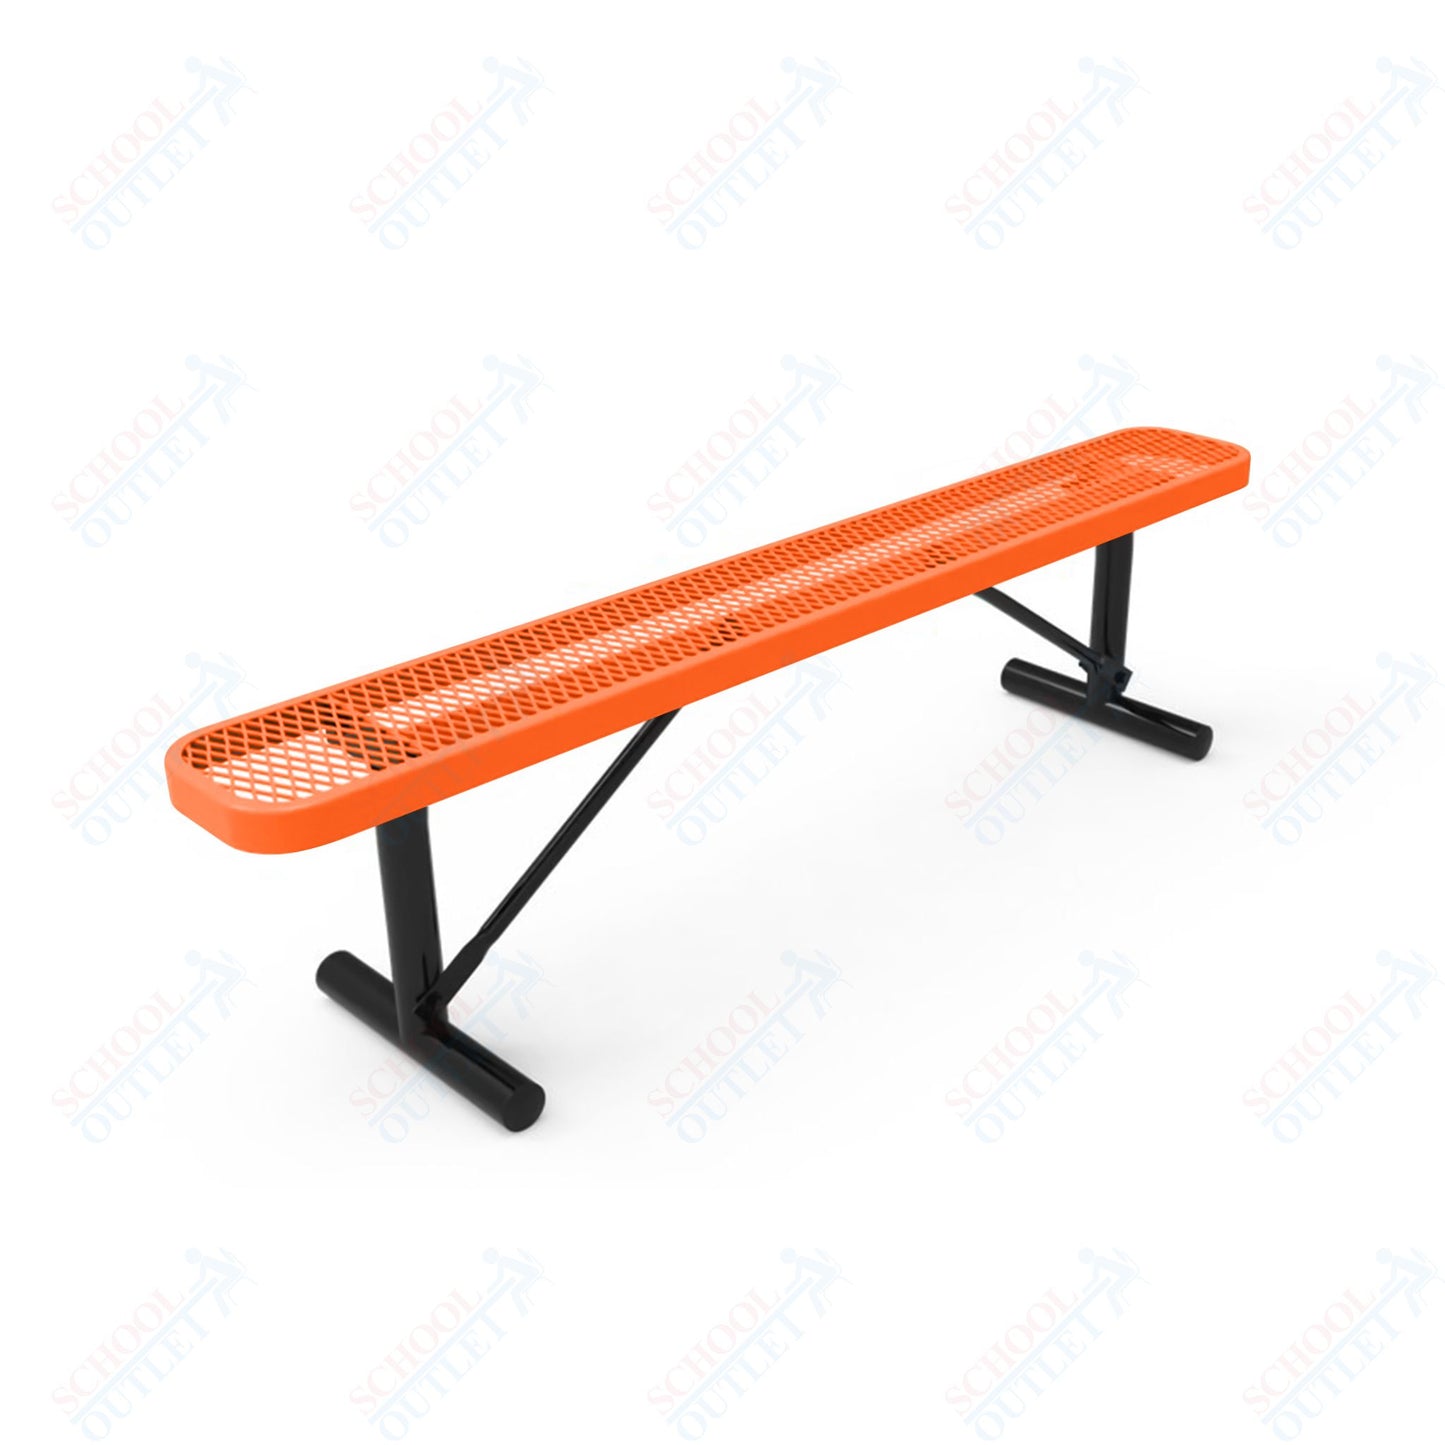 MyTcoat - Standard Portable Outdoor Bench with Back 6' L (MYT-BRT06-21)